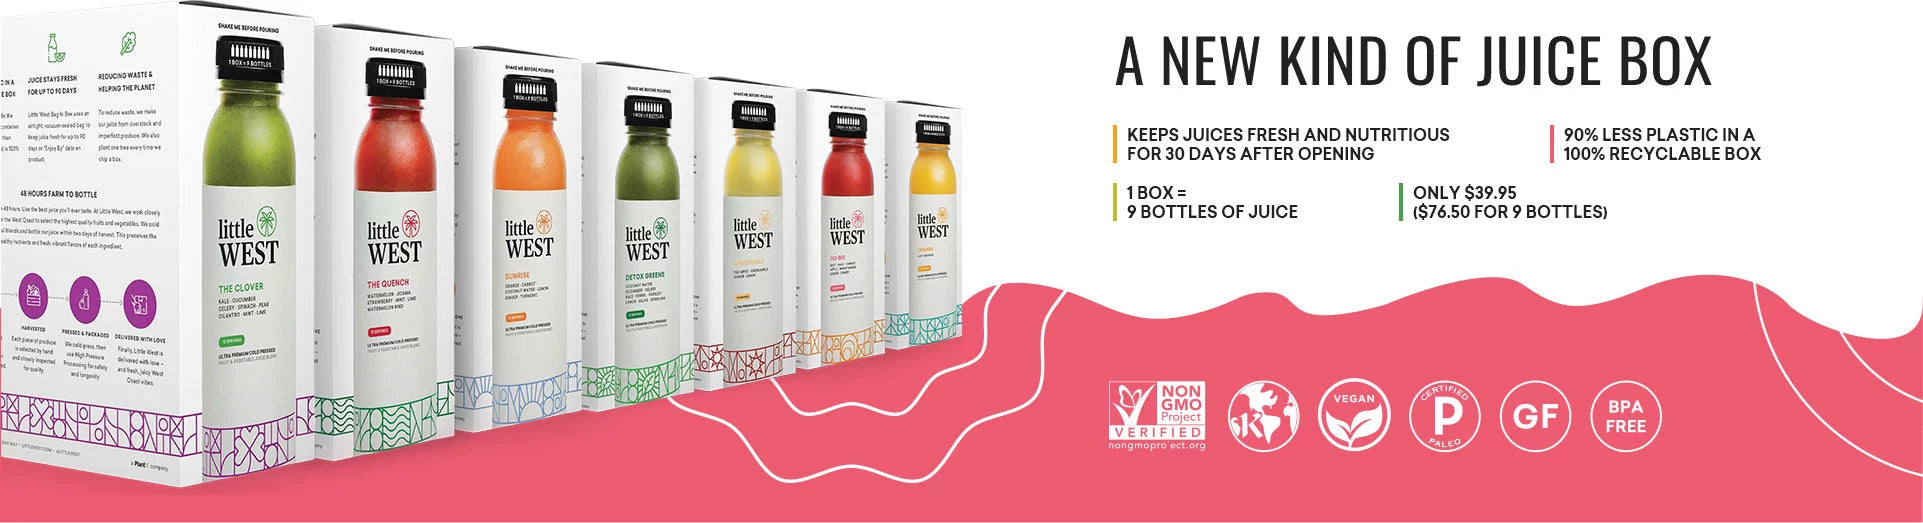 100% COLD PRESSED JUICE THAT'S LOWER IN SUGAR